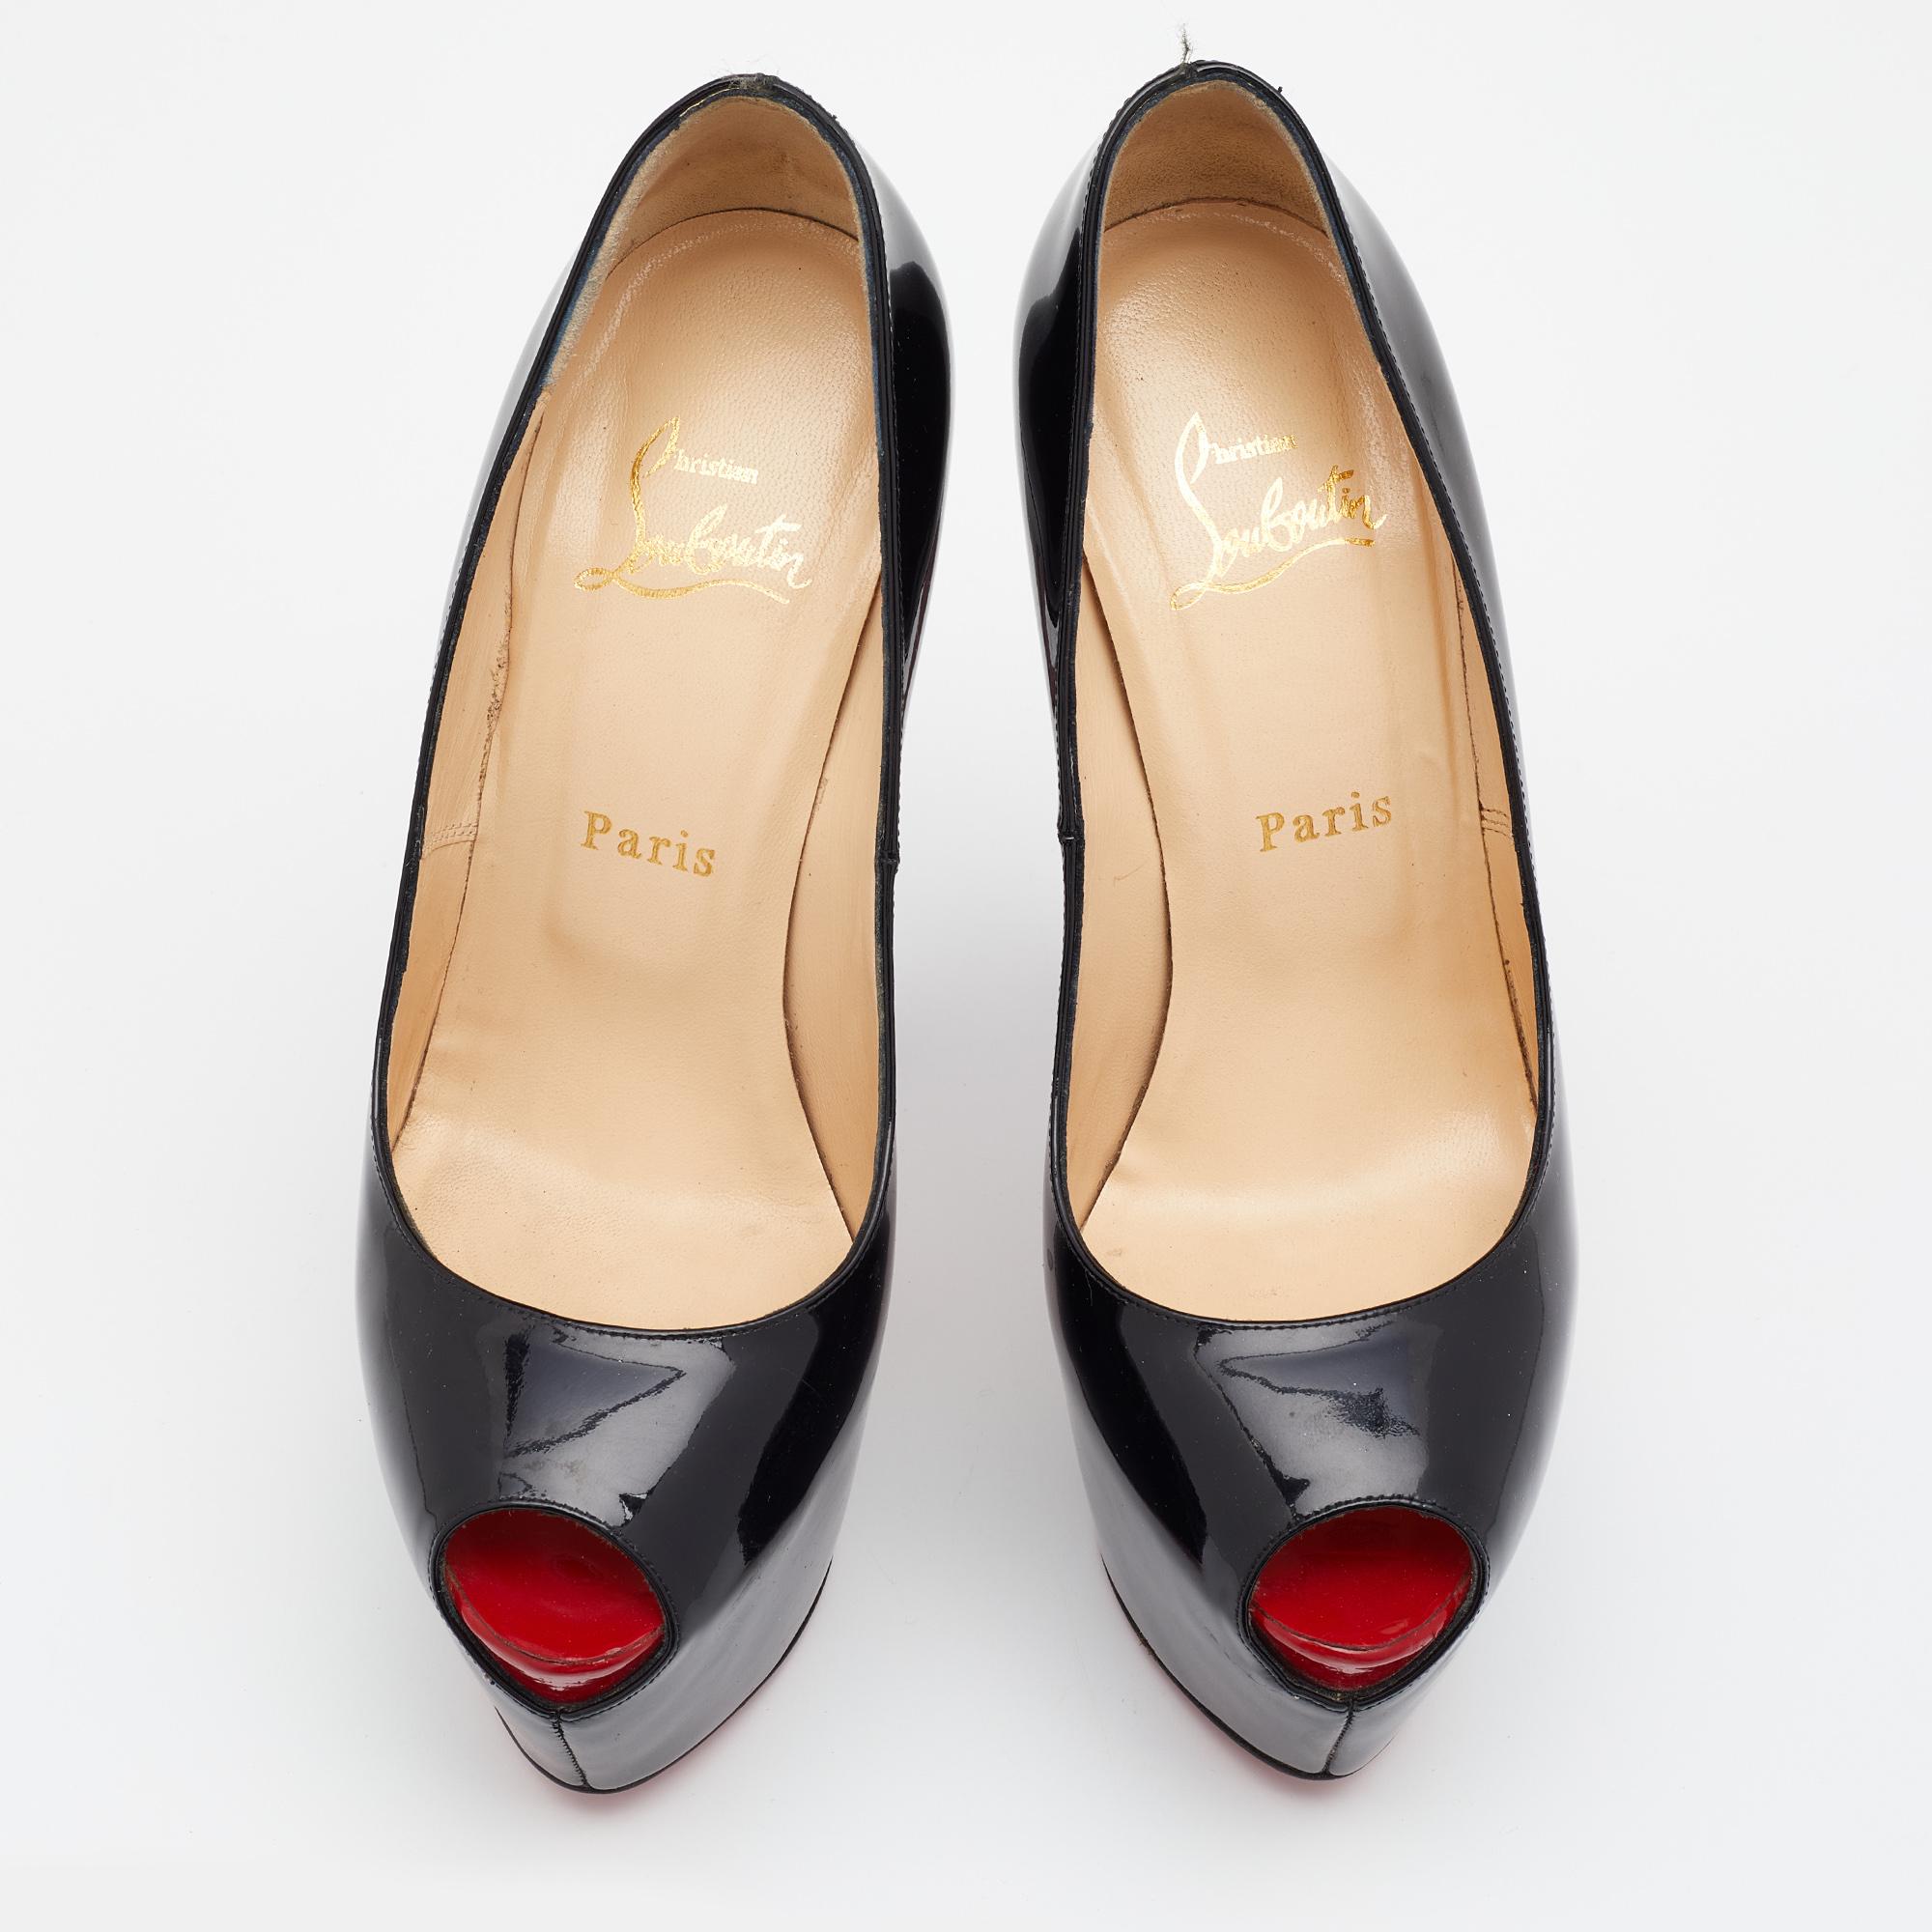 Work your magic while donning these Highness platform pumps crafted from patent leather. Perfect for parties, this pair of Christian Louboutin pumps matches well with cocktail dresses. It is complete with peep toes and towering 15.5 cm